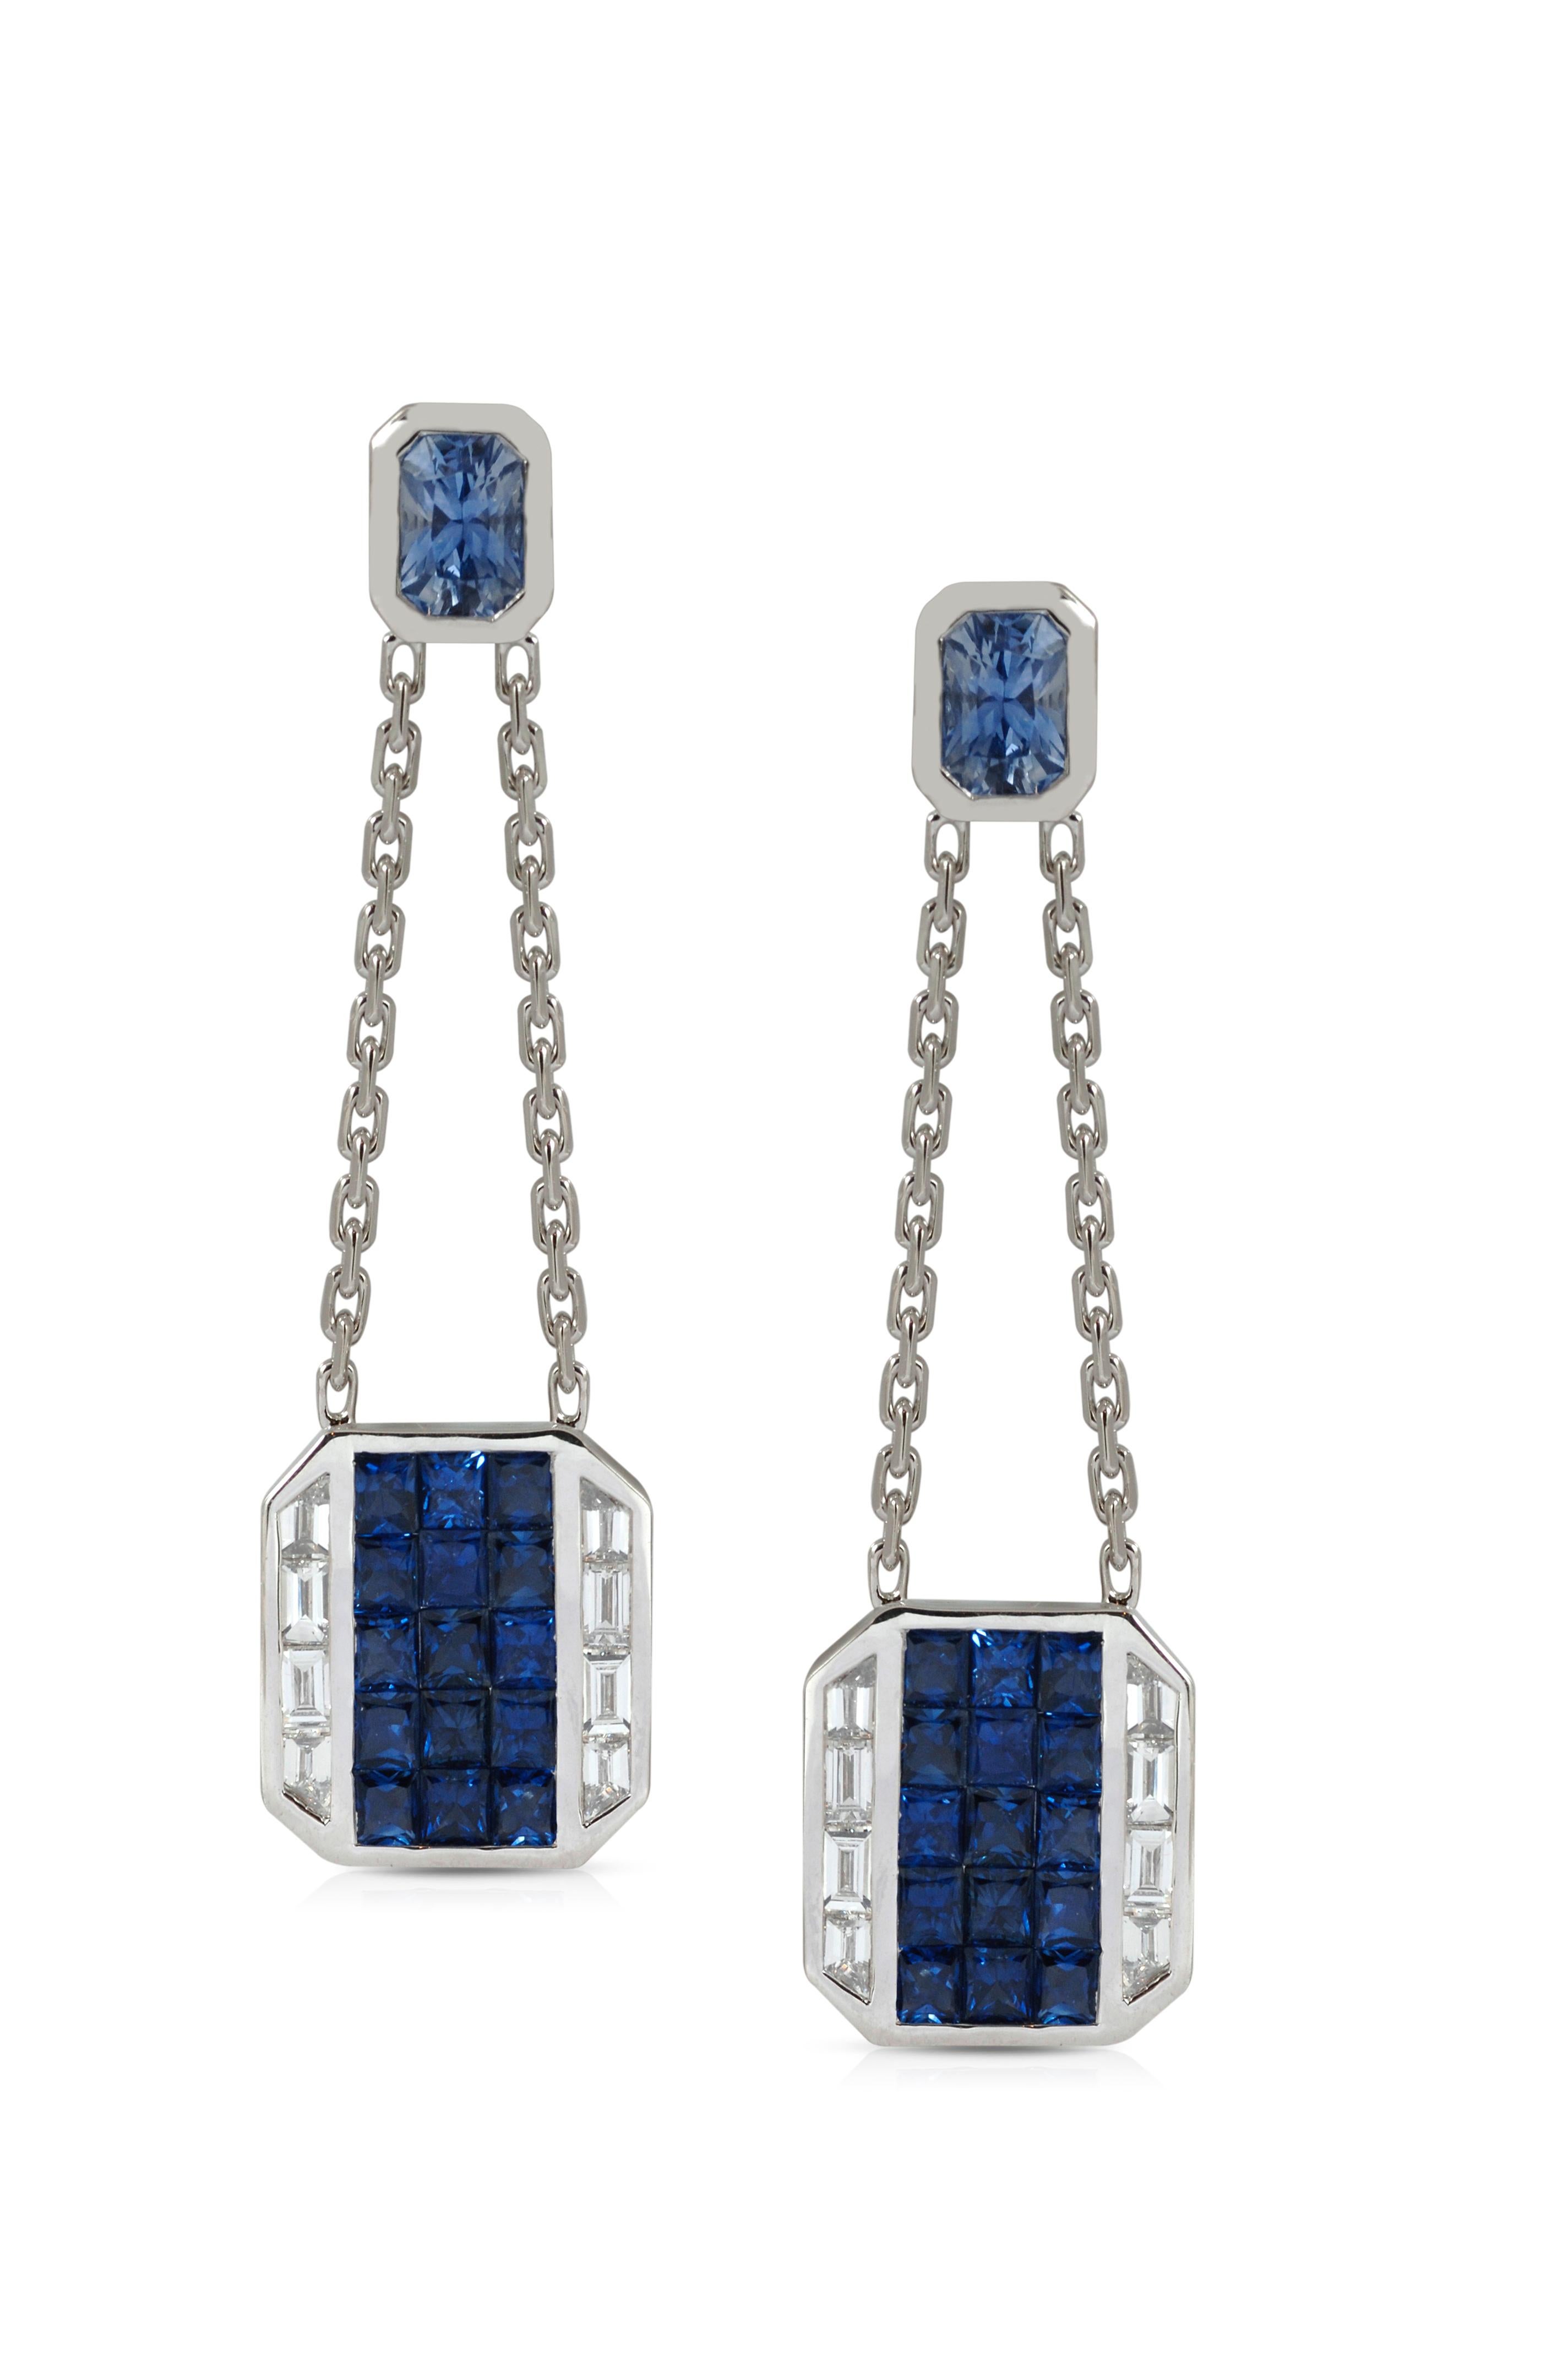 Blue Sapphire 4.78 carats with Diamond 0.74 carat Earrings set in 18 Karat White Gold Settings

Width:  1.3 cm 
Length:  4.8 cm
Total Weight: 9.97 grams

